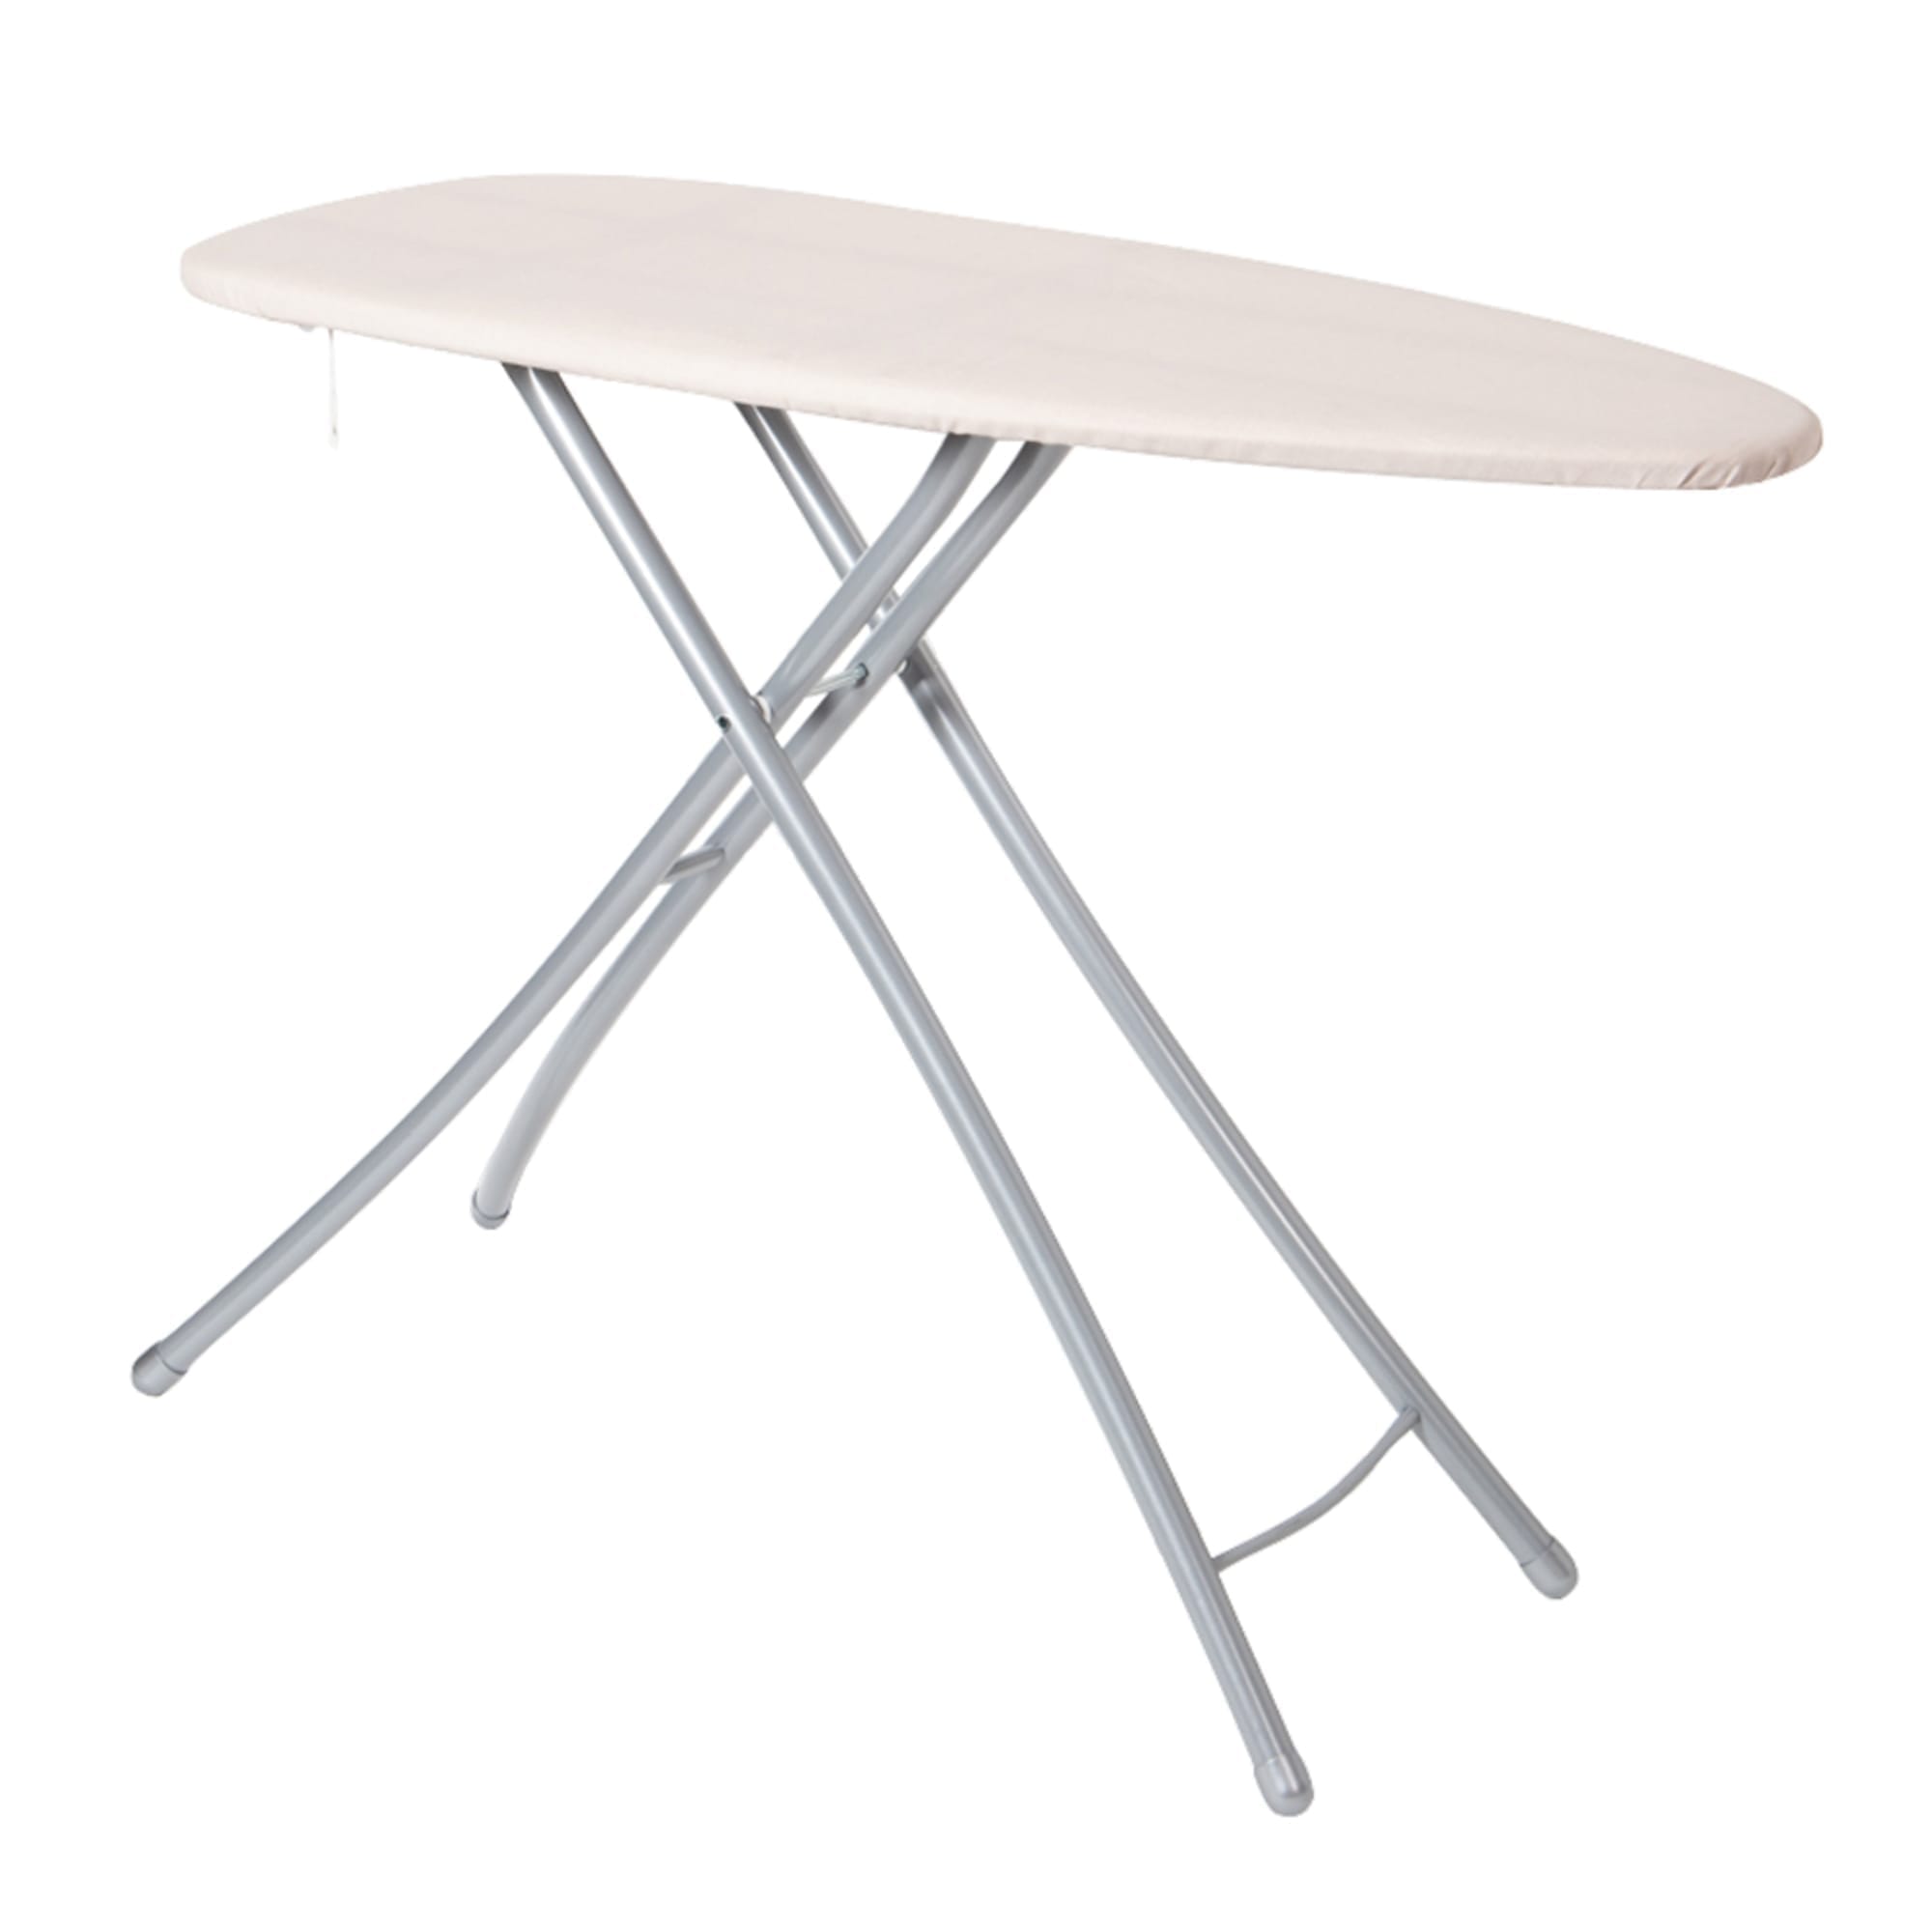 Seymour Home Products Adjustable Height, Wide Top Ironing Board, Linen Beige $50 EACH, CASE PACK OF 1